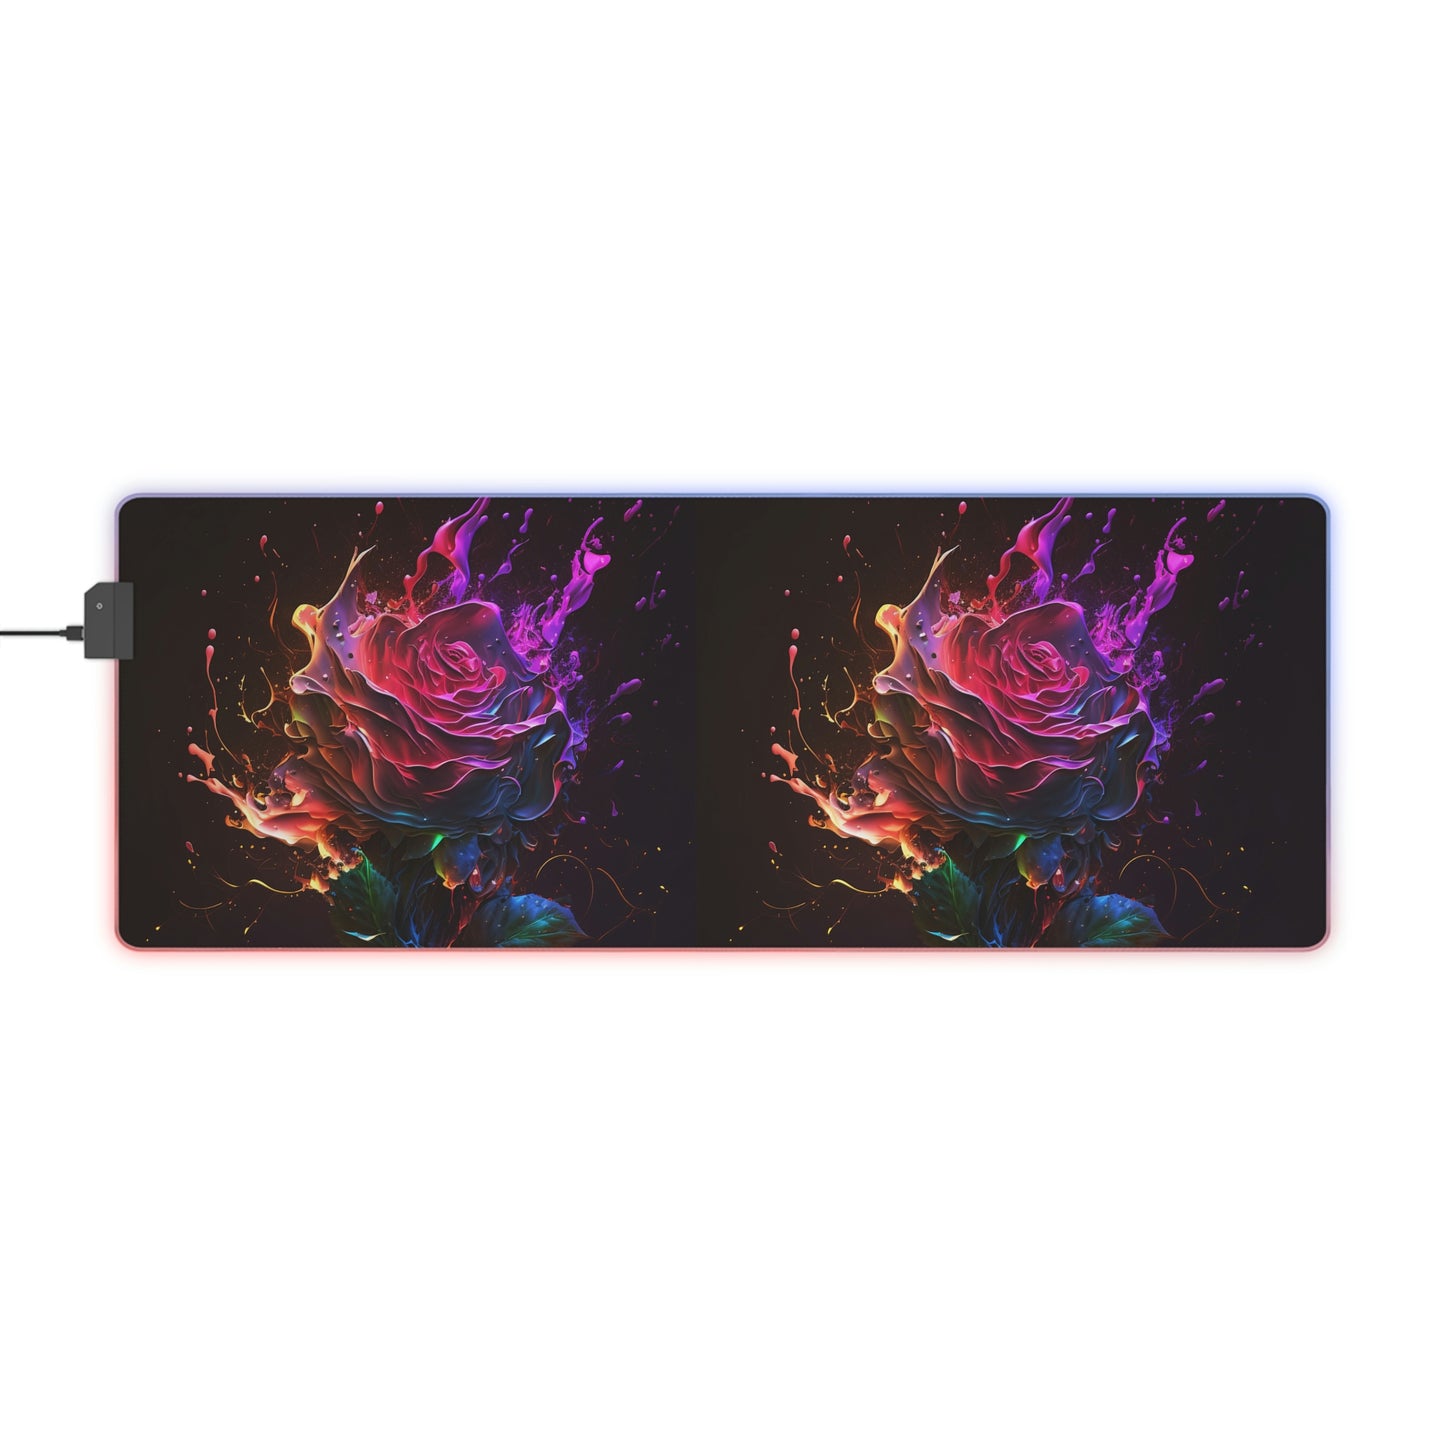 LED Gaming Mouse Pad Florescent Explosion 2